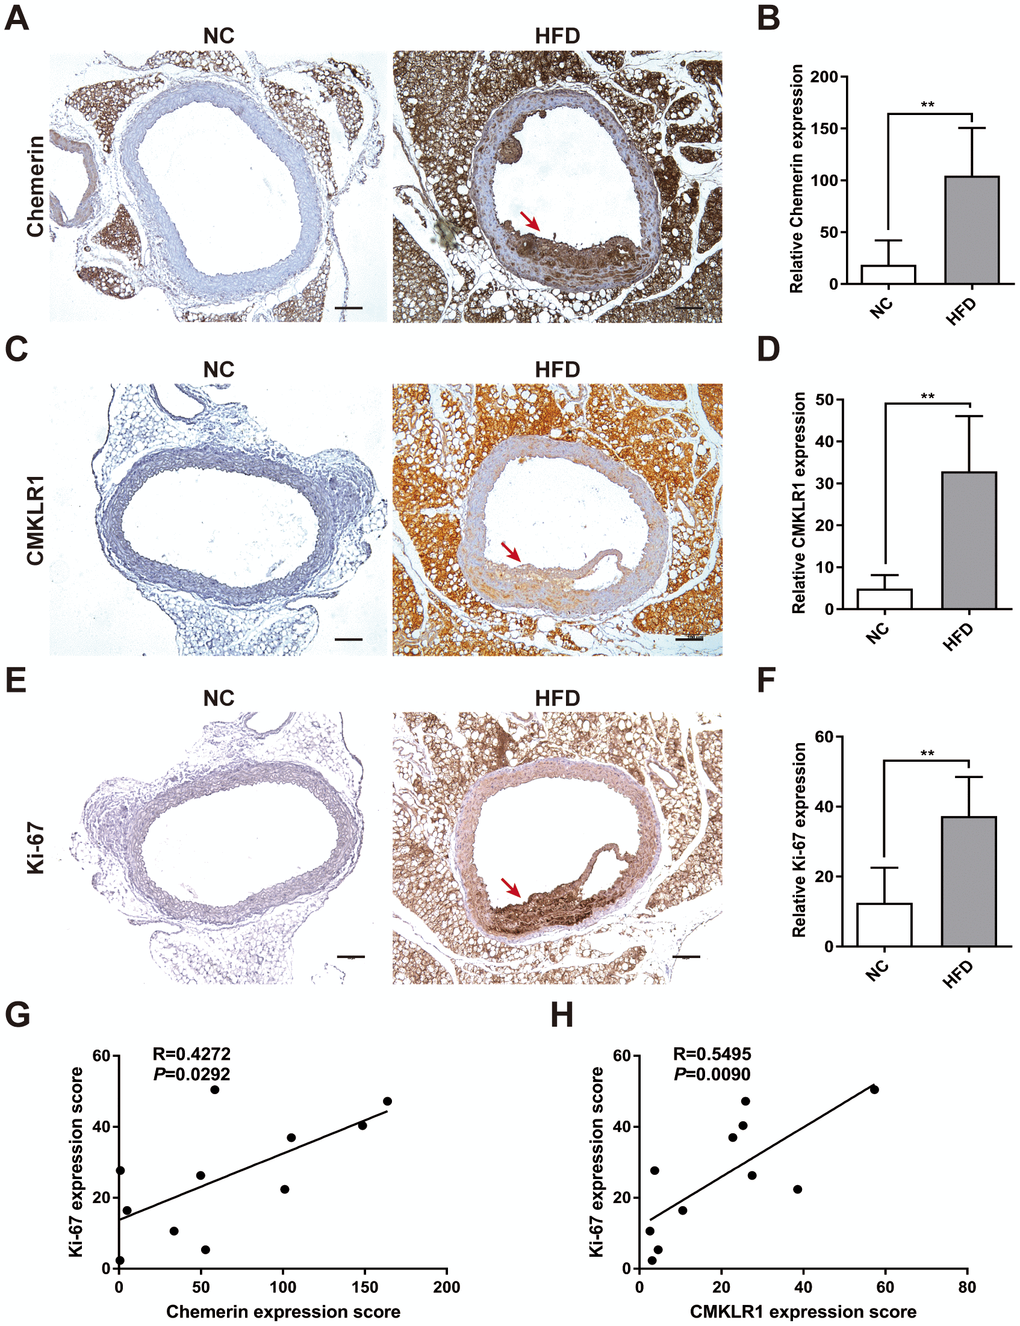 Chemerin / CMKLR1 is overexpressed in the aorta tissues of HFD ApoE-/- mice. A high fat diet (HFD) apo-lipoprotein E−/− (ApoE-/-) mouse model was established to determine the expression of the chemerin / chemokine-like receptor 1 (CMKLR1) axis in atherosclerotic aorta tissues. (A) Immunohistochemical (IHC) analysis of chemerin expression in aorta tissues of negative control (NC, n = 5) and HFD (n = 6) mice. Scale bar = 100 μm. Red arrows indicate plaques. (B) The chemerin expression score analysis data are presented as means ± standard deviations (SDs). **, pC) Representative images of CMKLR1 expression in aorta tissues following IHC analysis. Scale bar = 100 μm. Red arrows indicate plaques. (D) CMKLR1 expression score analysis. **, pE, F) IHC analysis of Ki-67 expression in the aorta tissues of normal and HFD mice. Scale bar = 100 μm. Red arrows indicate plaques. Data from Ki-67 expression score analysis are presented as means ± SDs. **, pG, H) The correlations of chemerin / CMKLR1 and Ki-67 were calculated using the Spearman method.